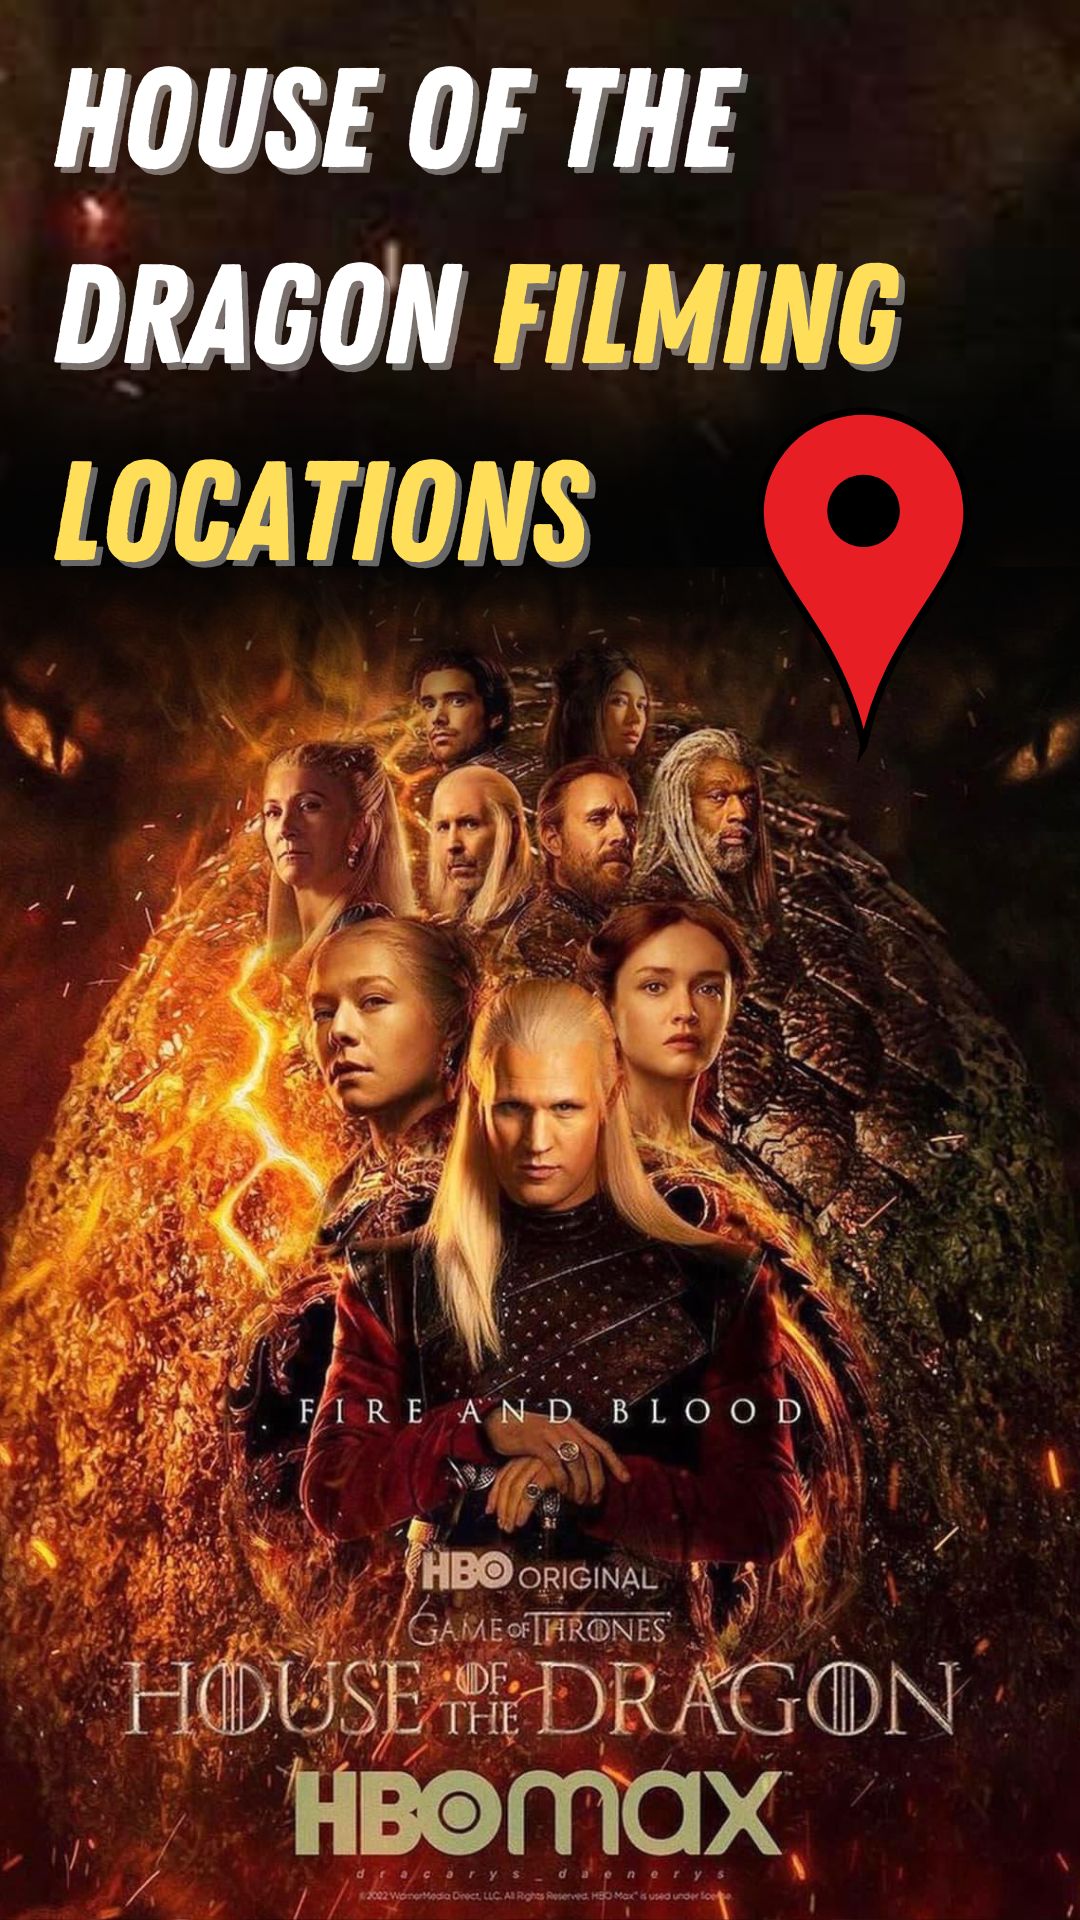 House of The Dragon Filming Locations